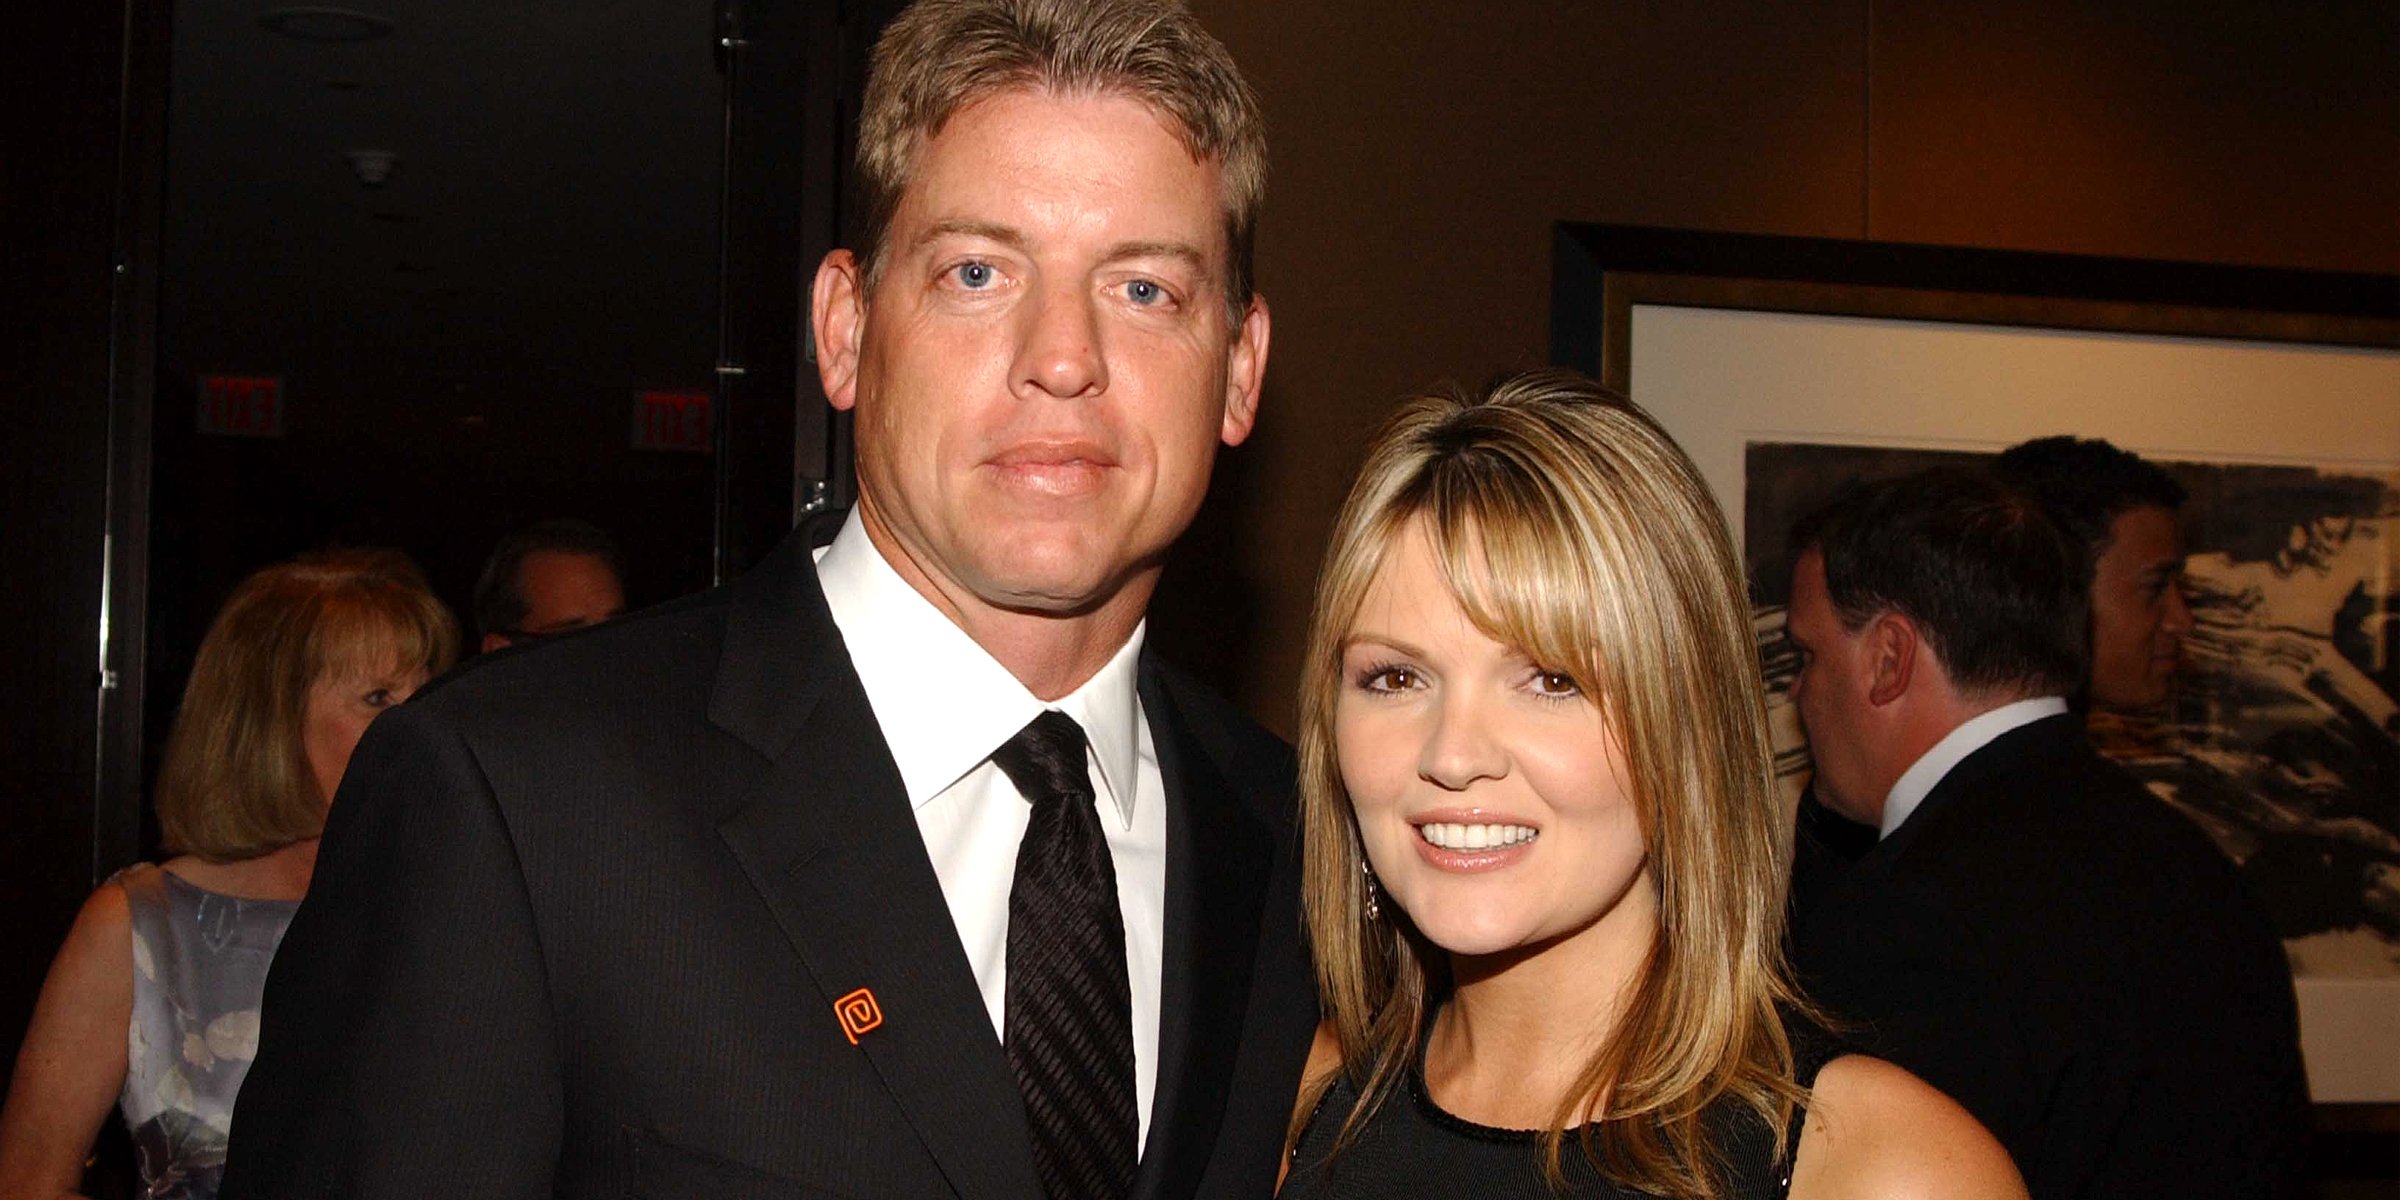 Rhonda Worthey and Troy Aikman | Source: Getty Images